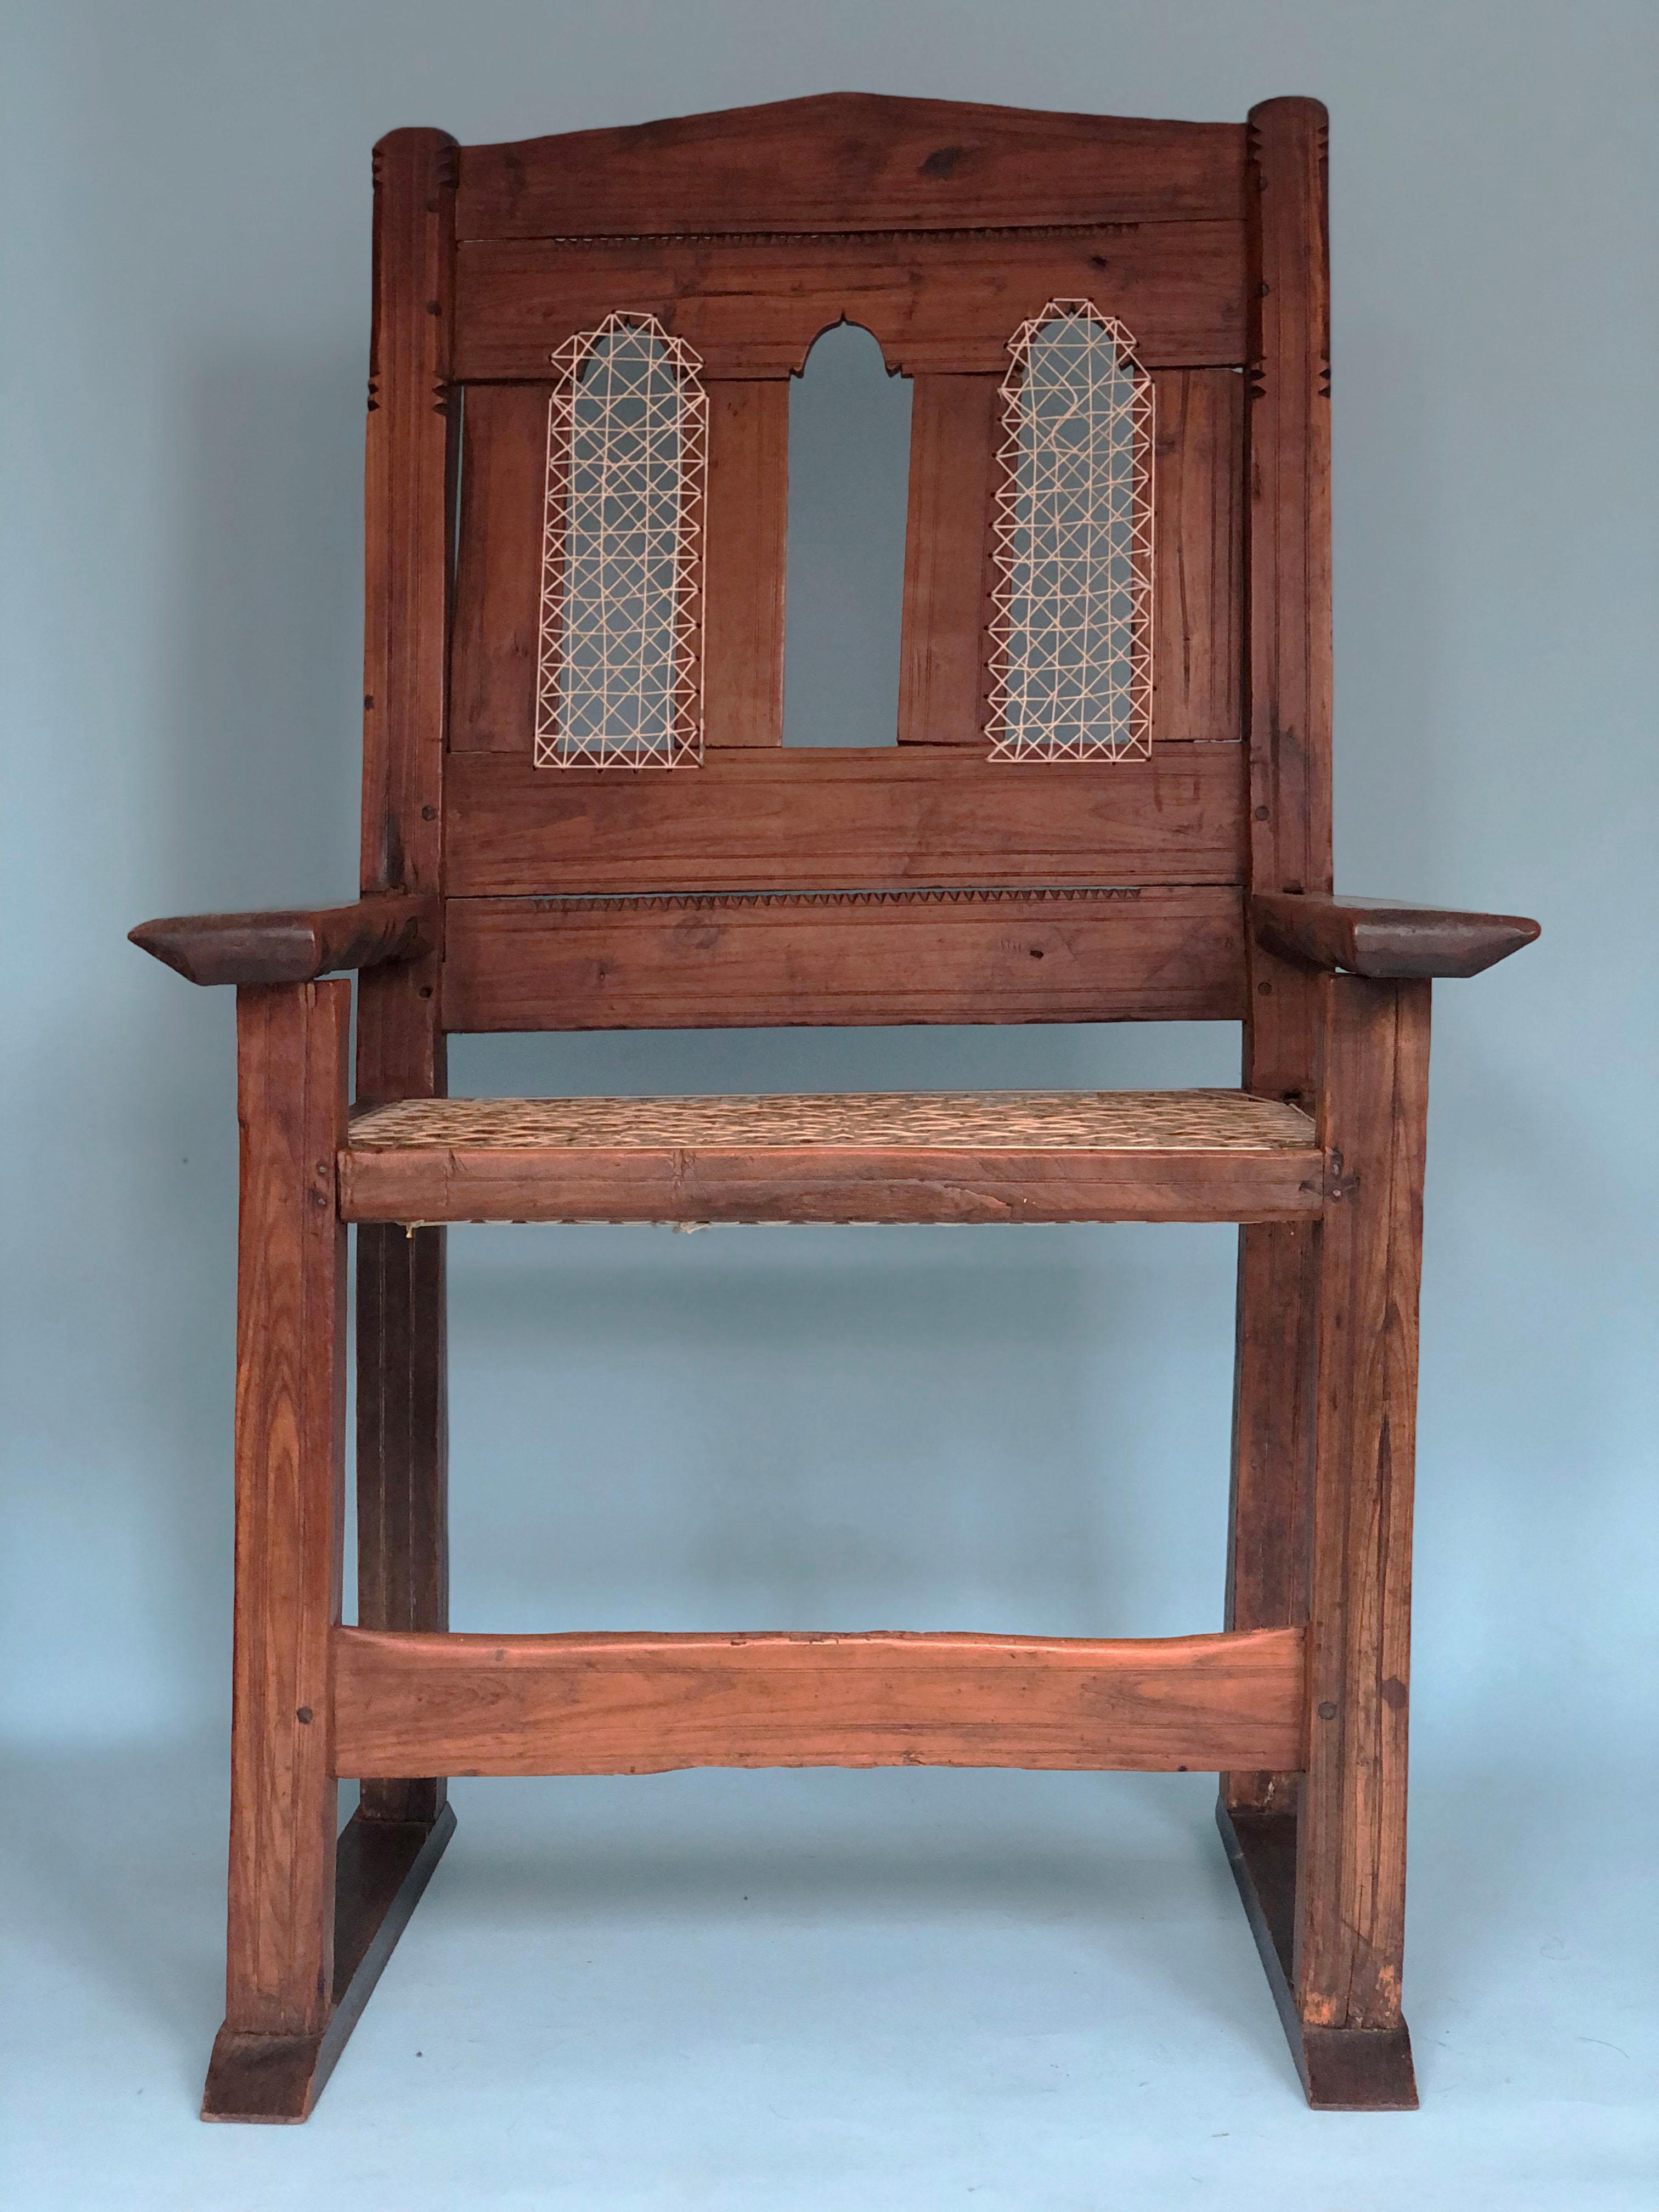 Hand-Carved Antique Indian Hand Carved Teak Chair 1940s For Sale